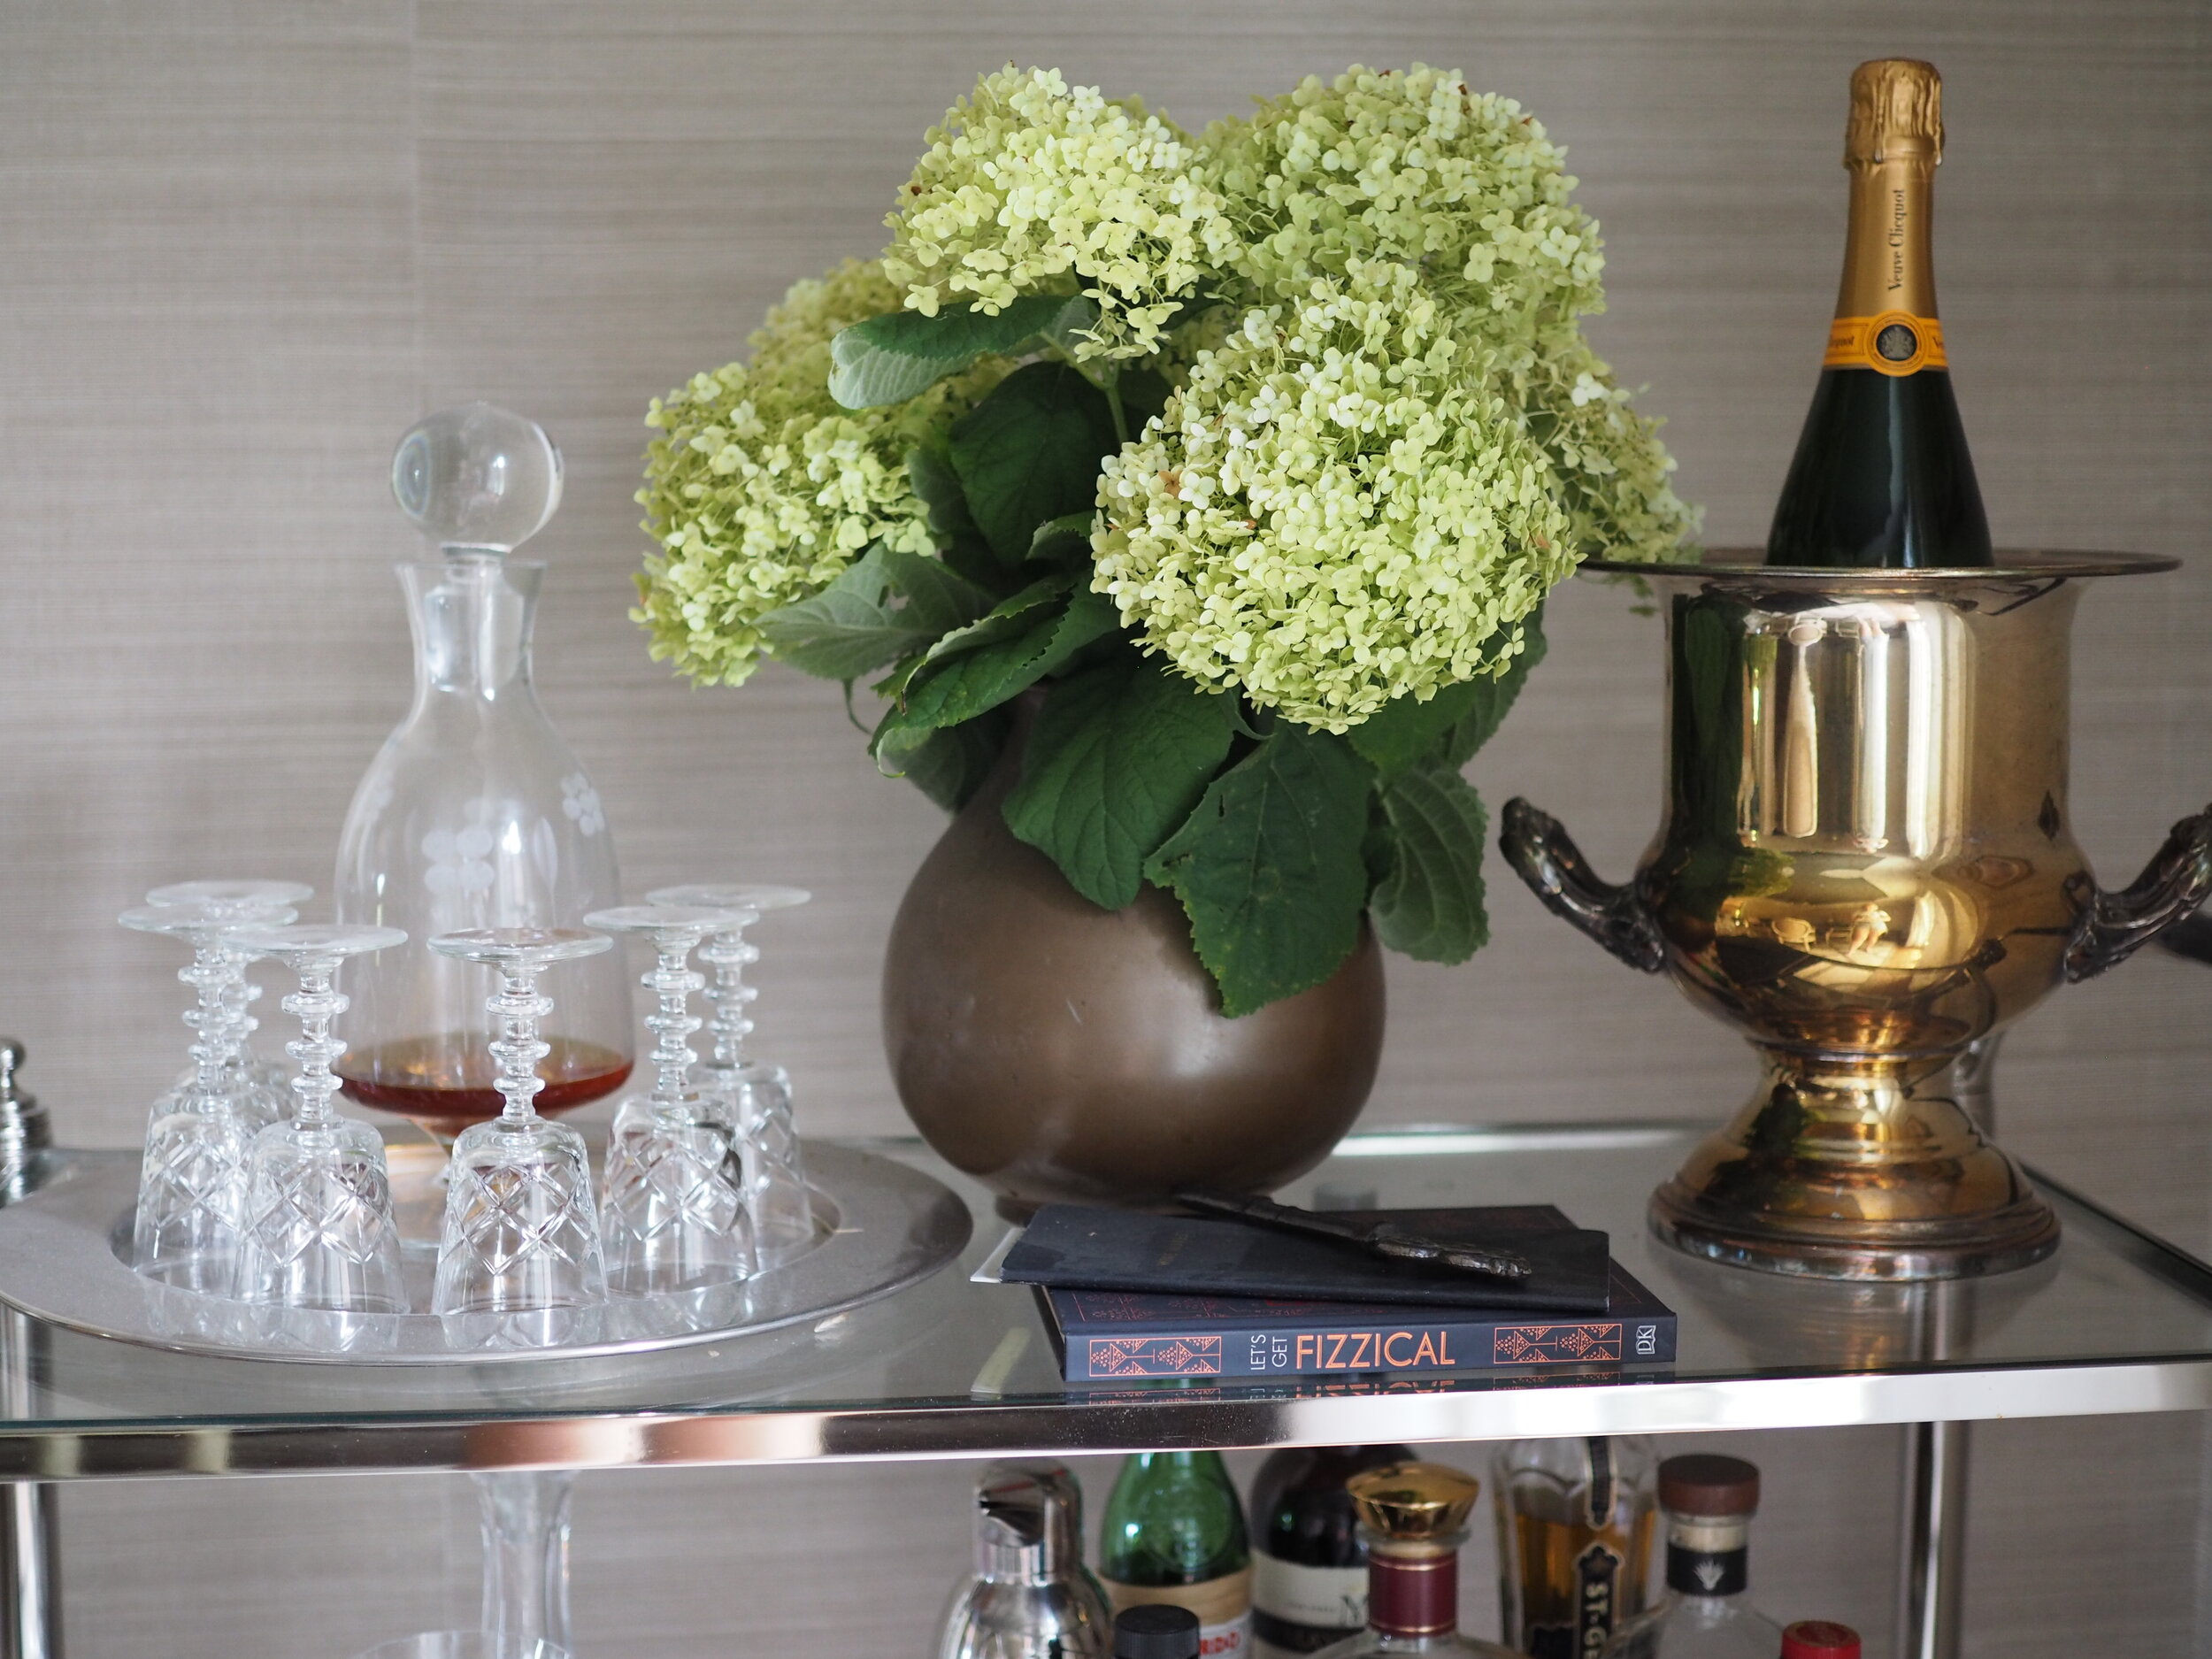 Port glasses, fresh hydrangeas and a vintage silver plated Champagne bucket